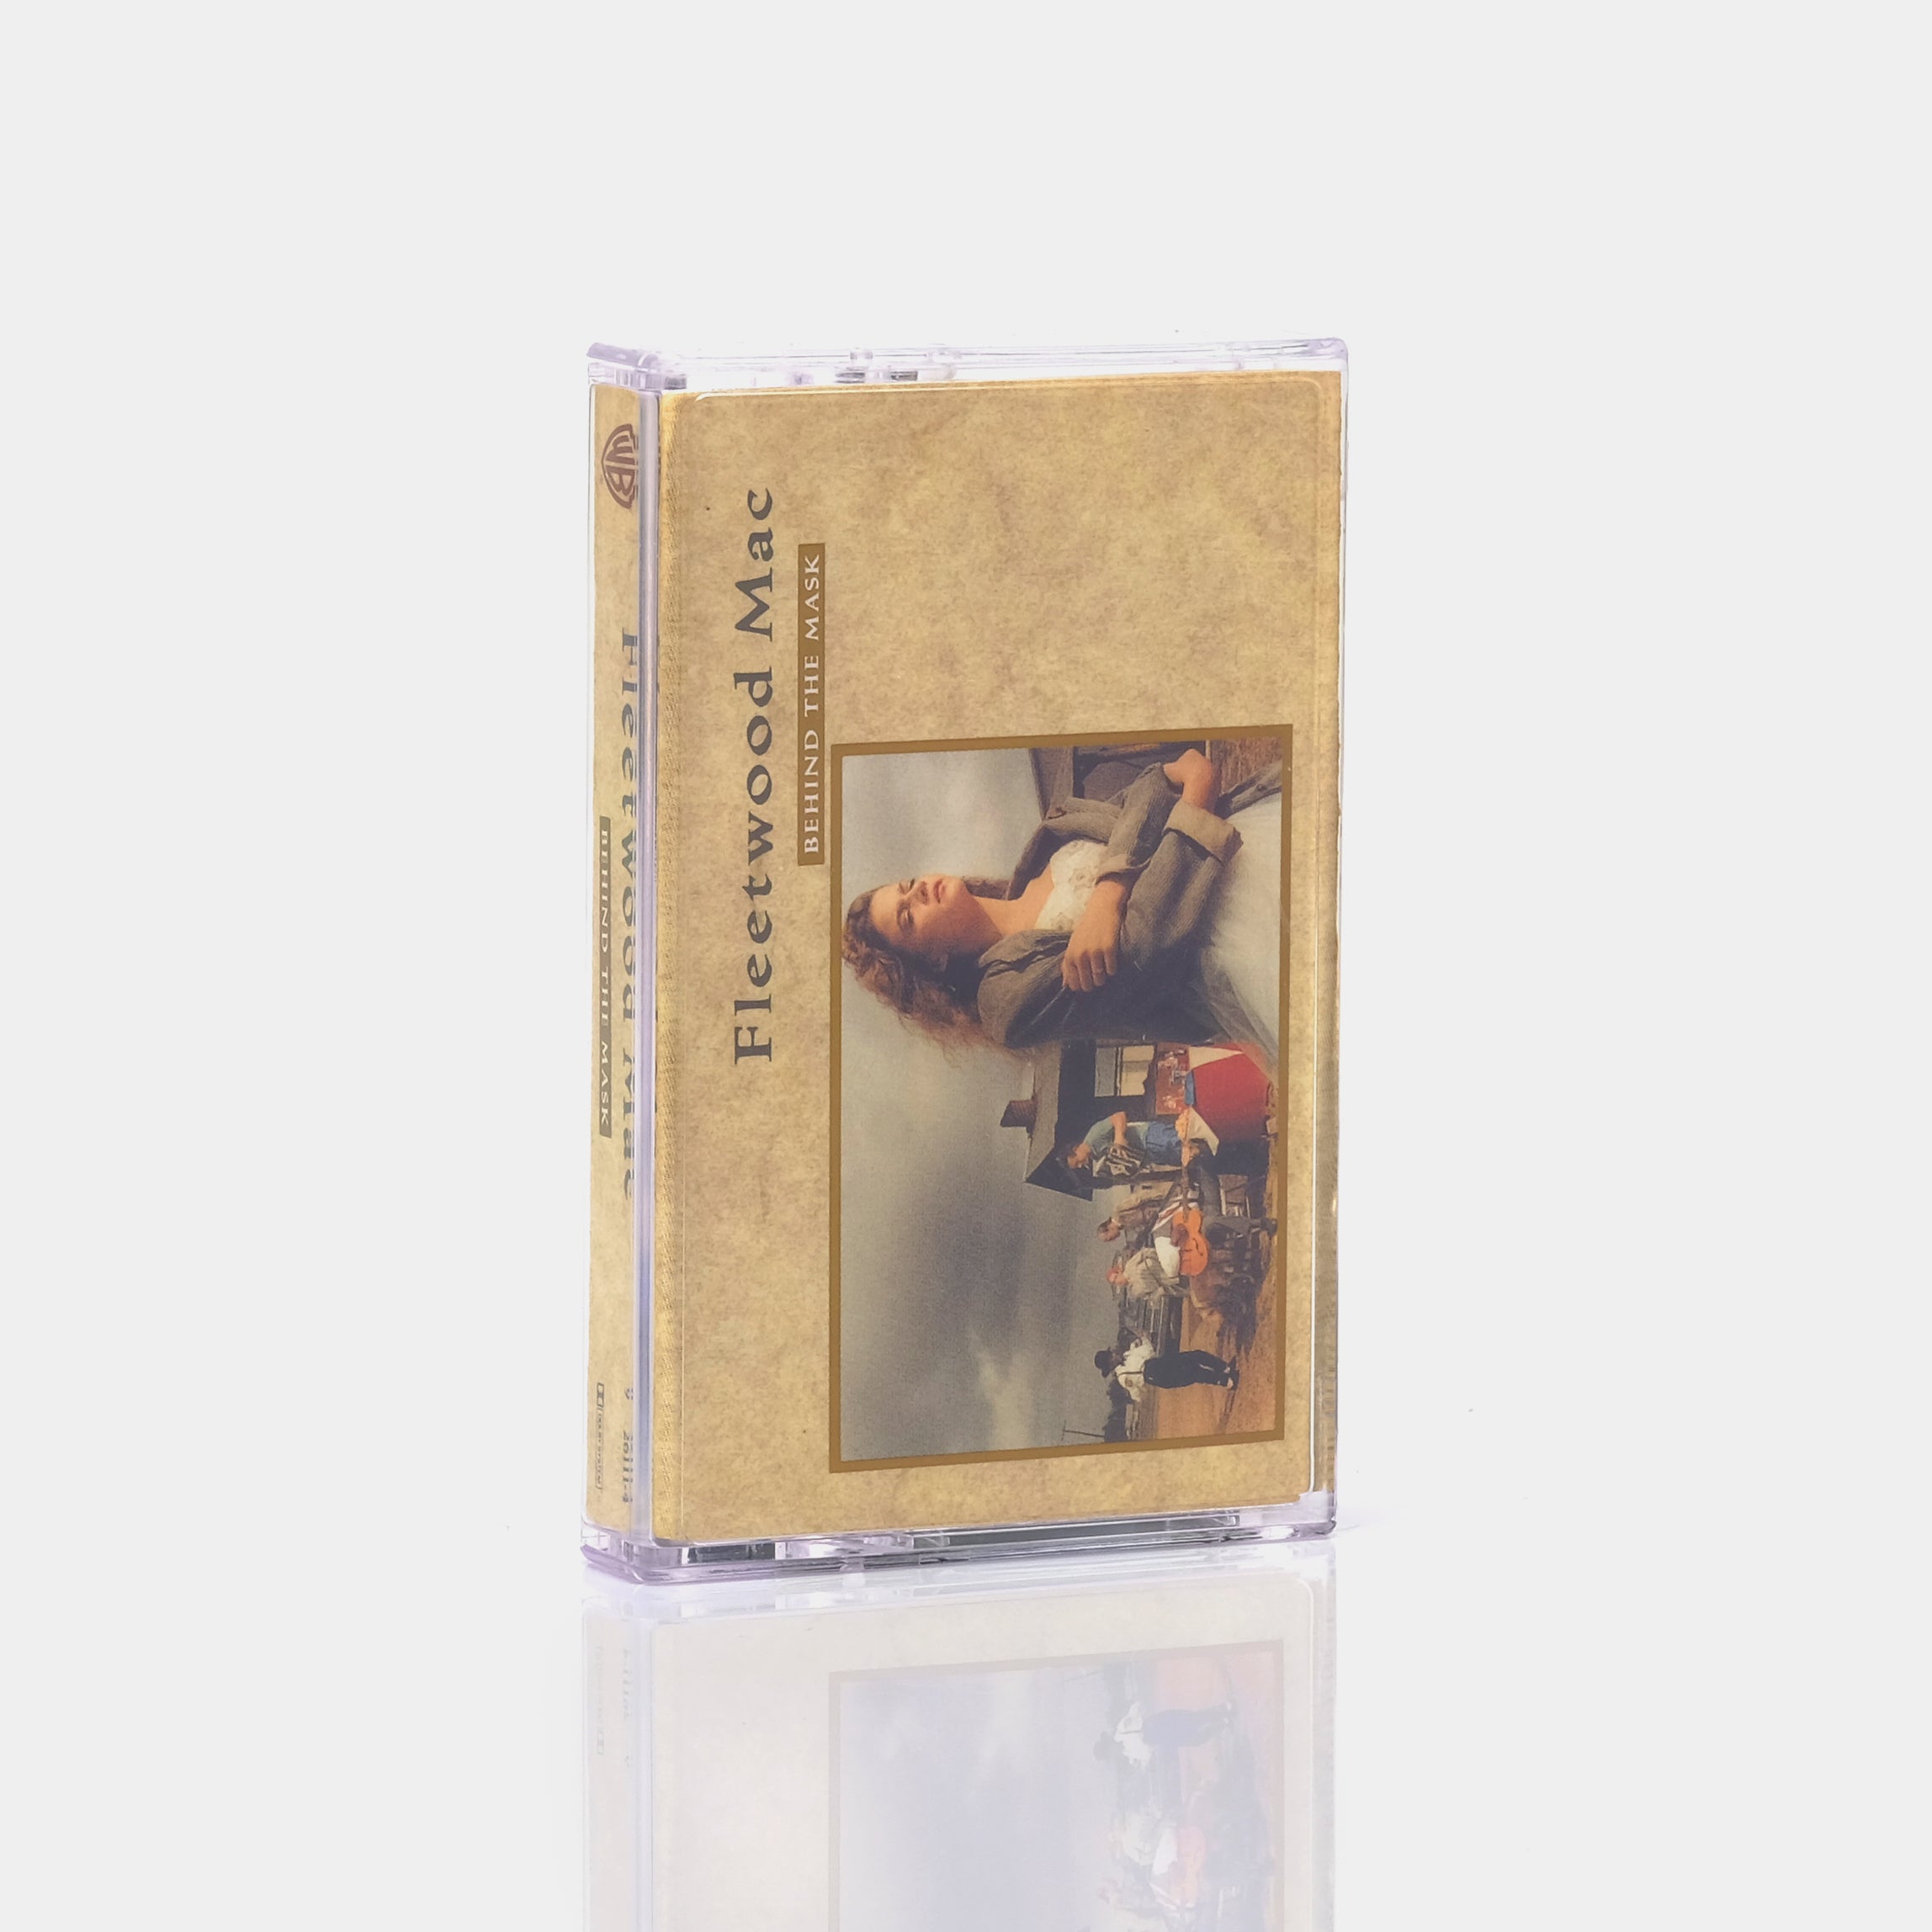 Fleetwood Mac - Behind The Mask Cassette Tape